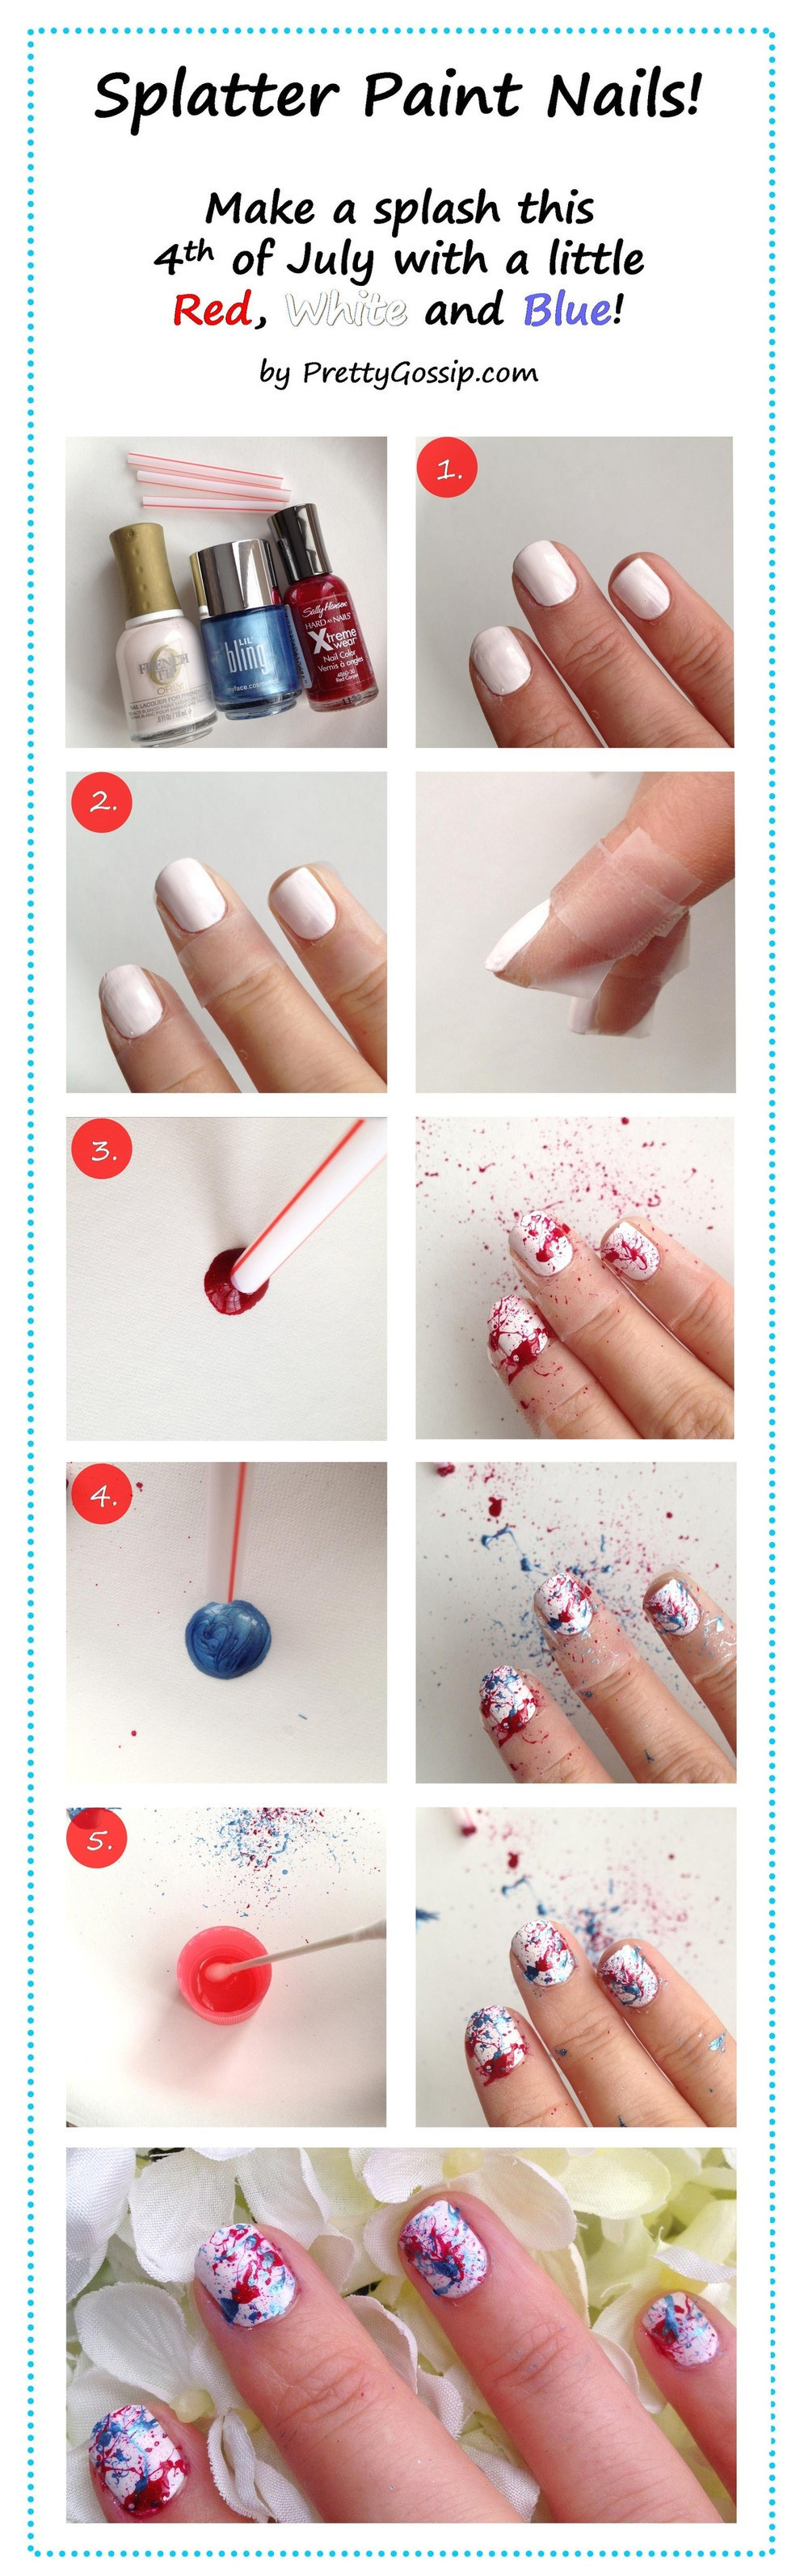 Course Basic Nail Art | Crystal Nails Suisse